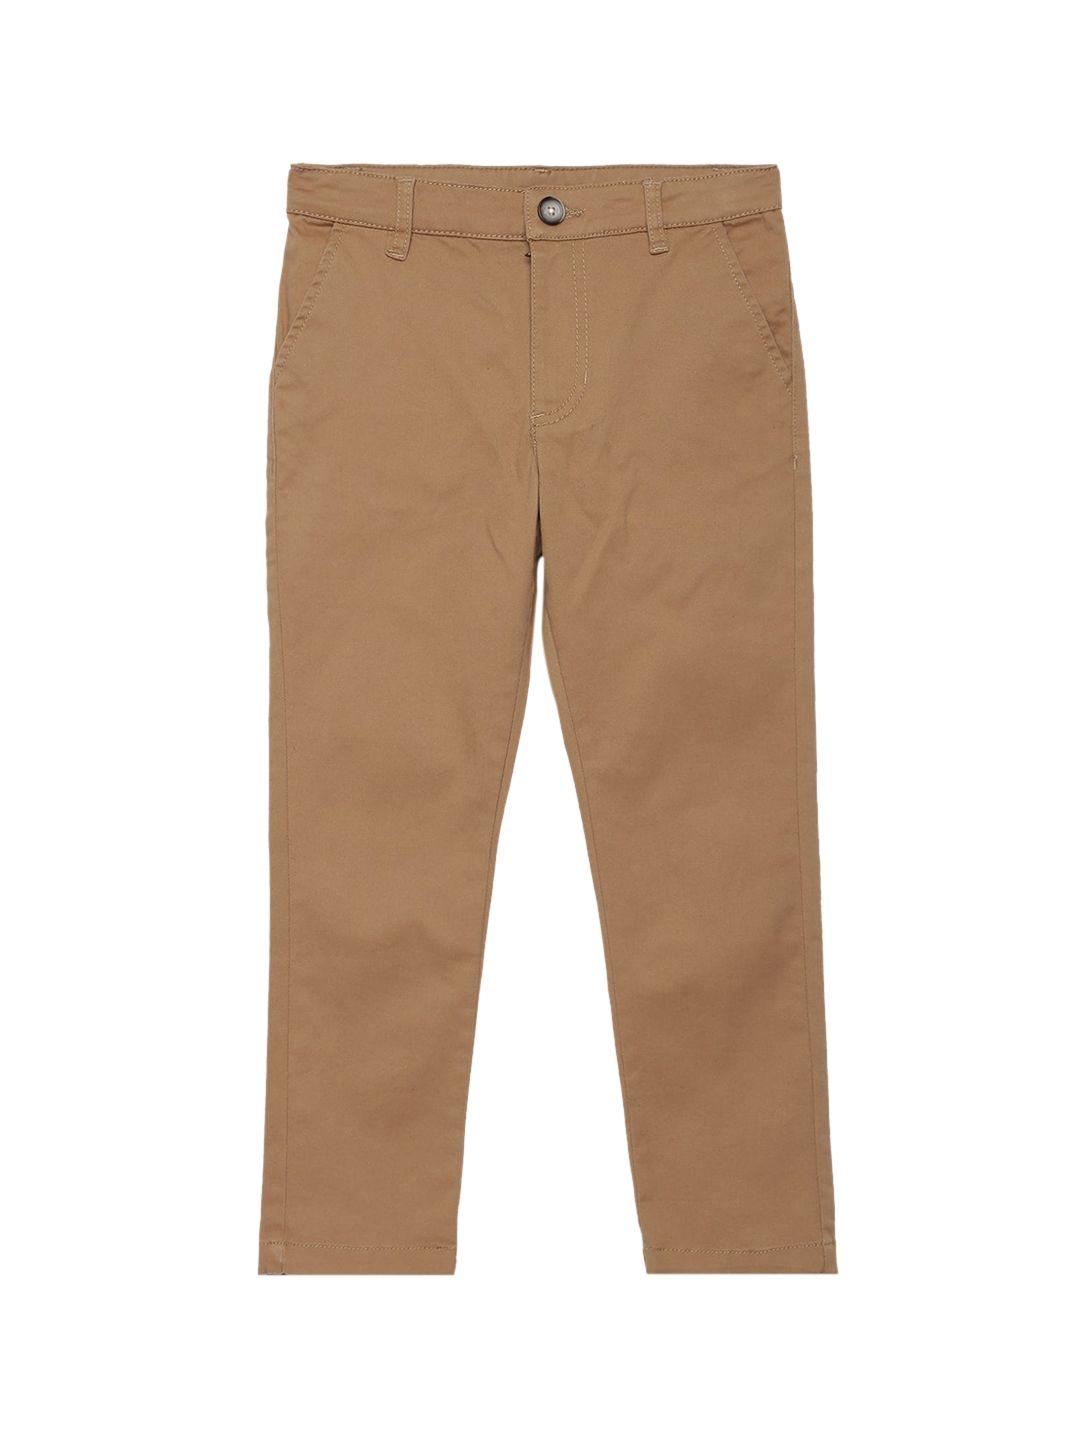 under fourteen only boys khaki slim fit chinos trousers